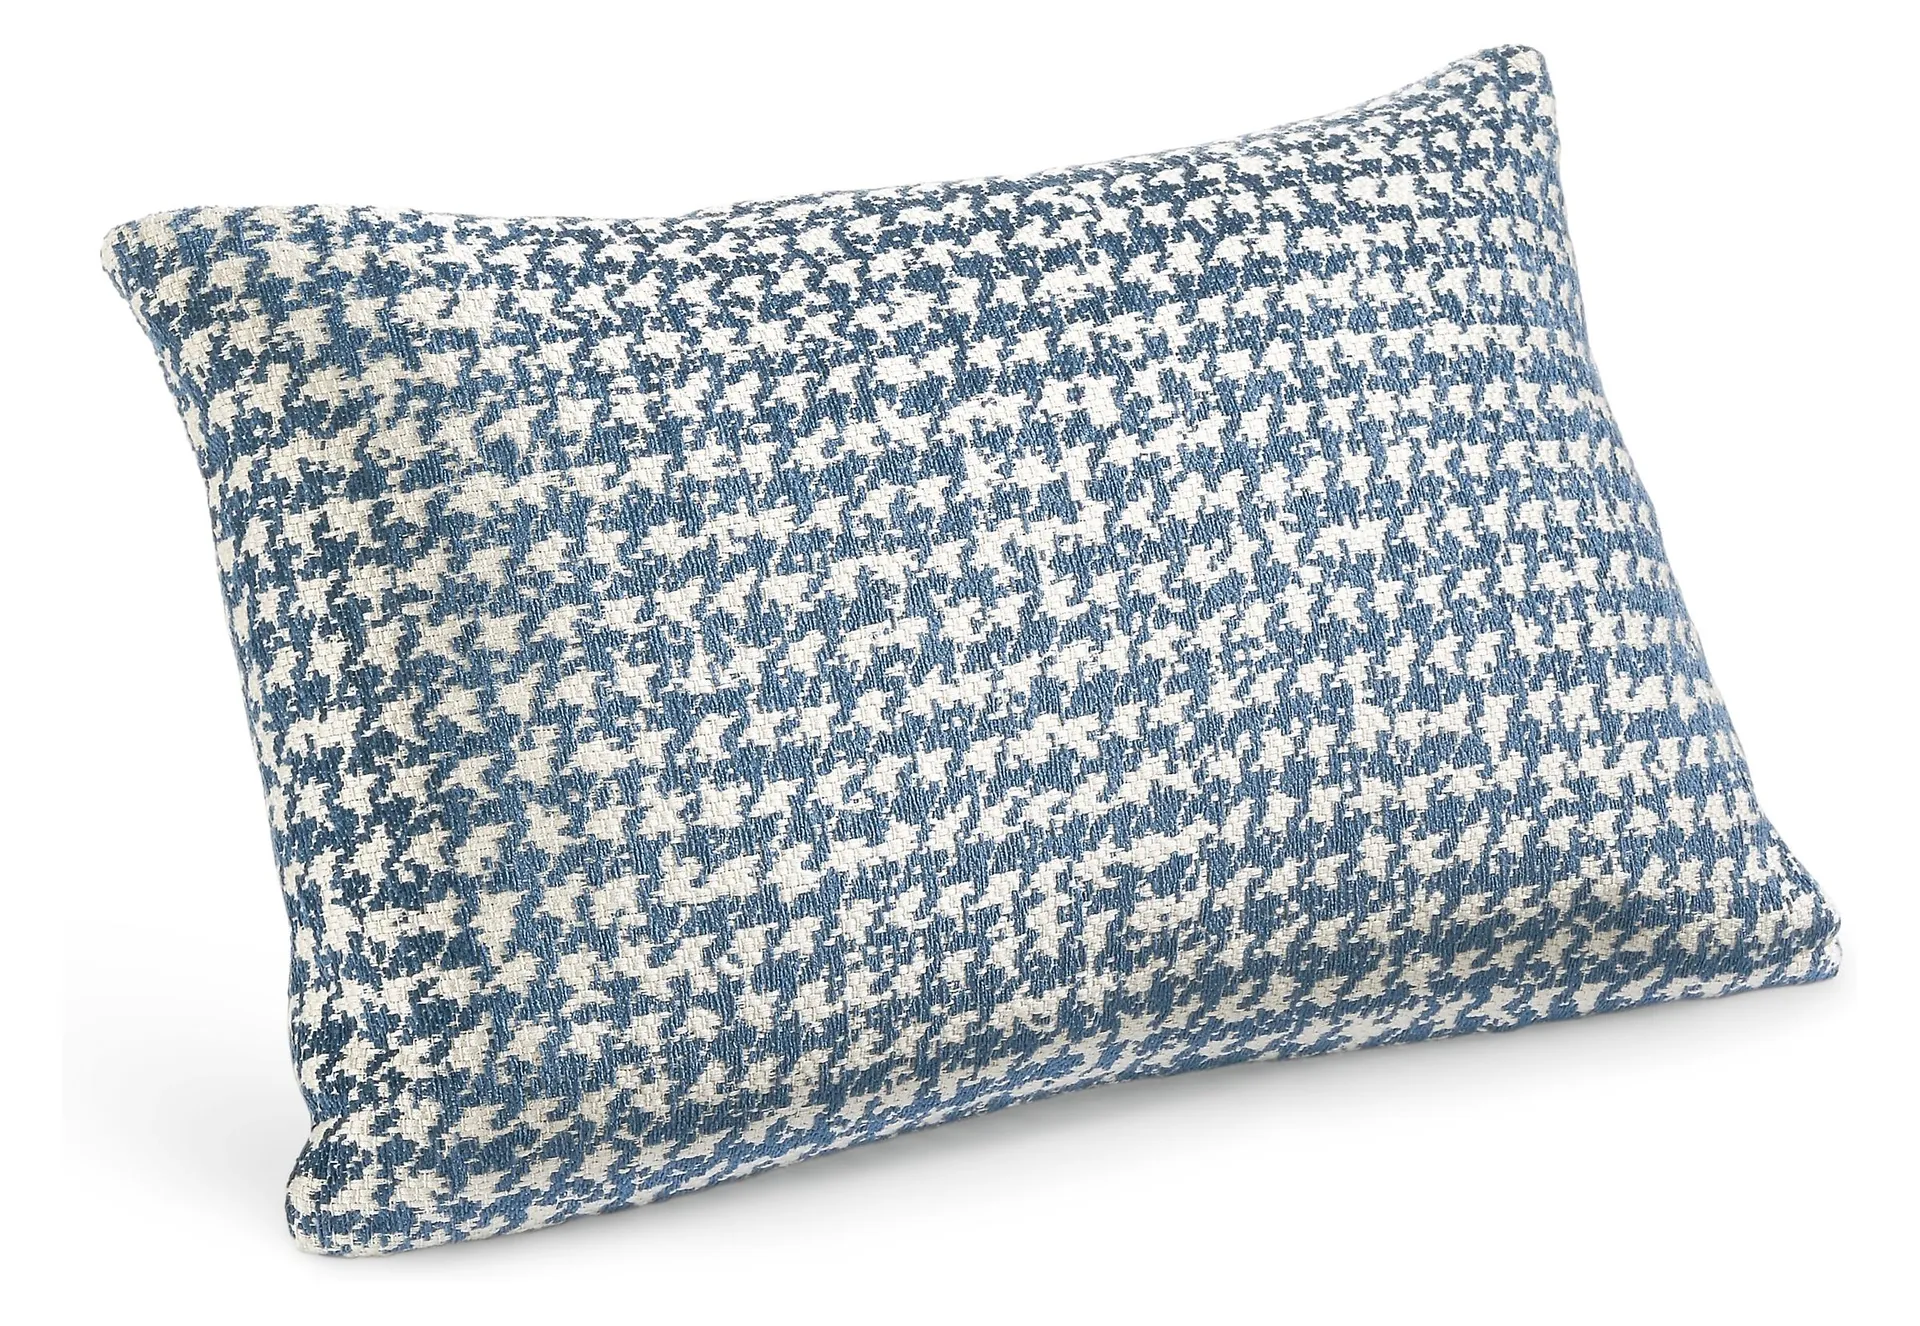 Barnes 20w 13h Throw Pillow Cover in Blue/White